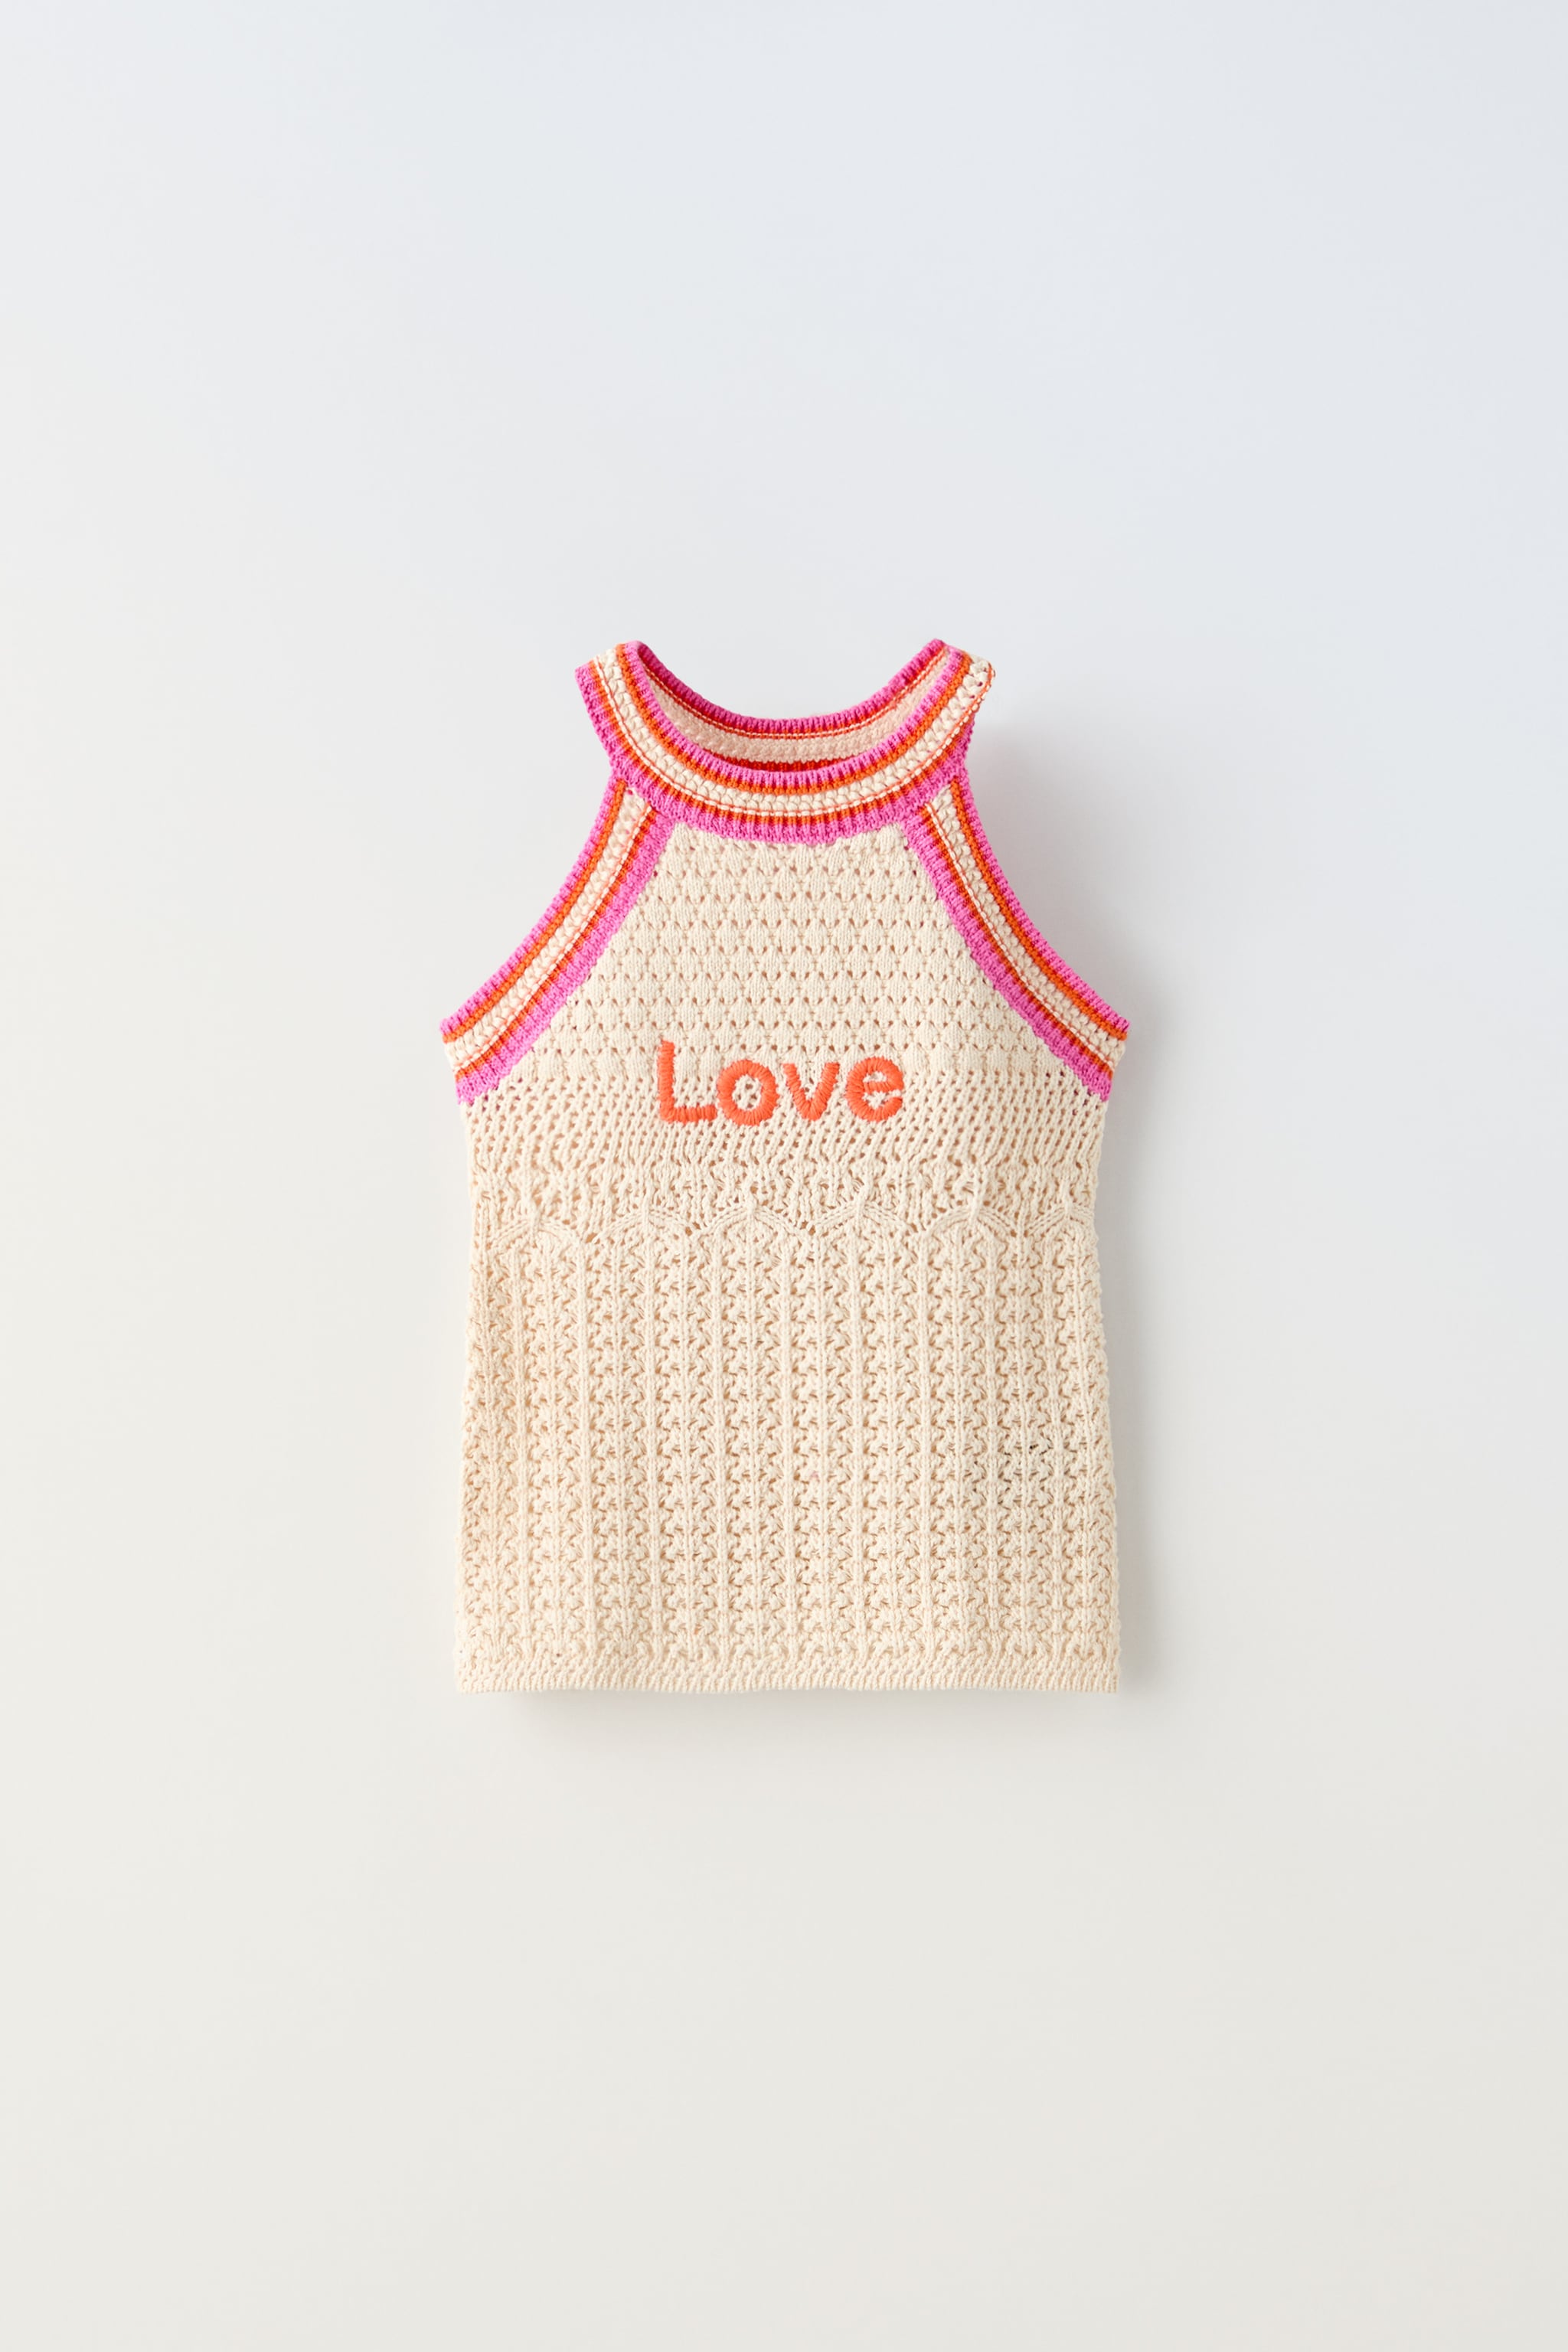 EMBROIDERED TEXT CROCHET TOP